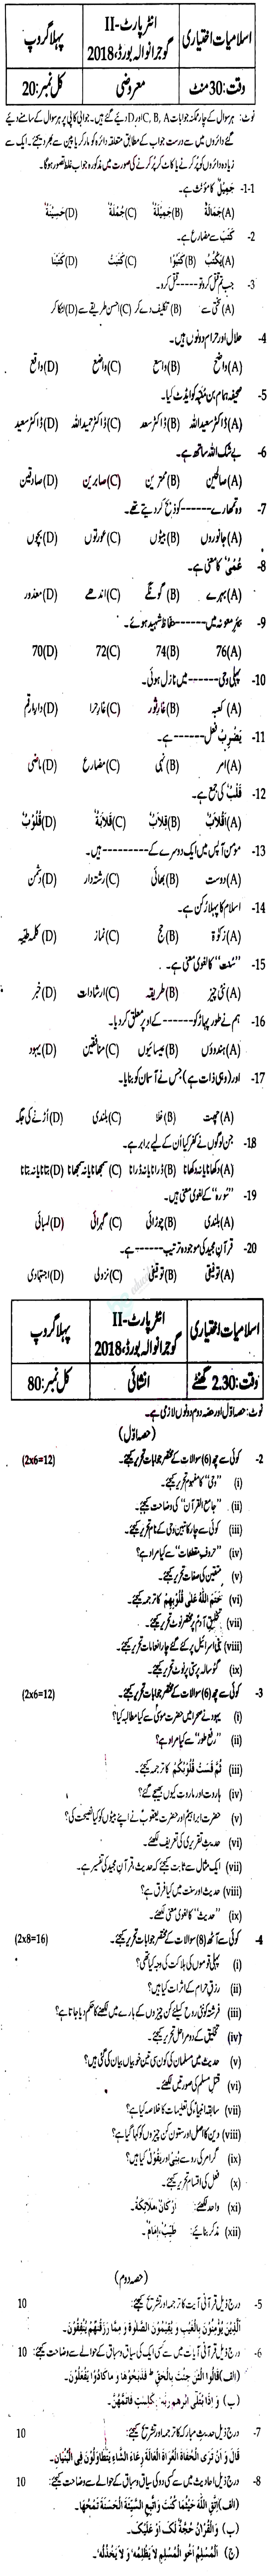 Islamiat Elective FA Part 2 Past Paper Group 1 BISE Gujranwala 2018